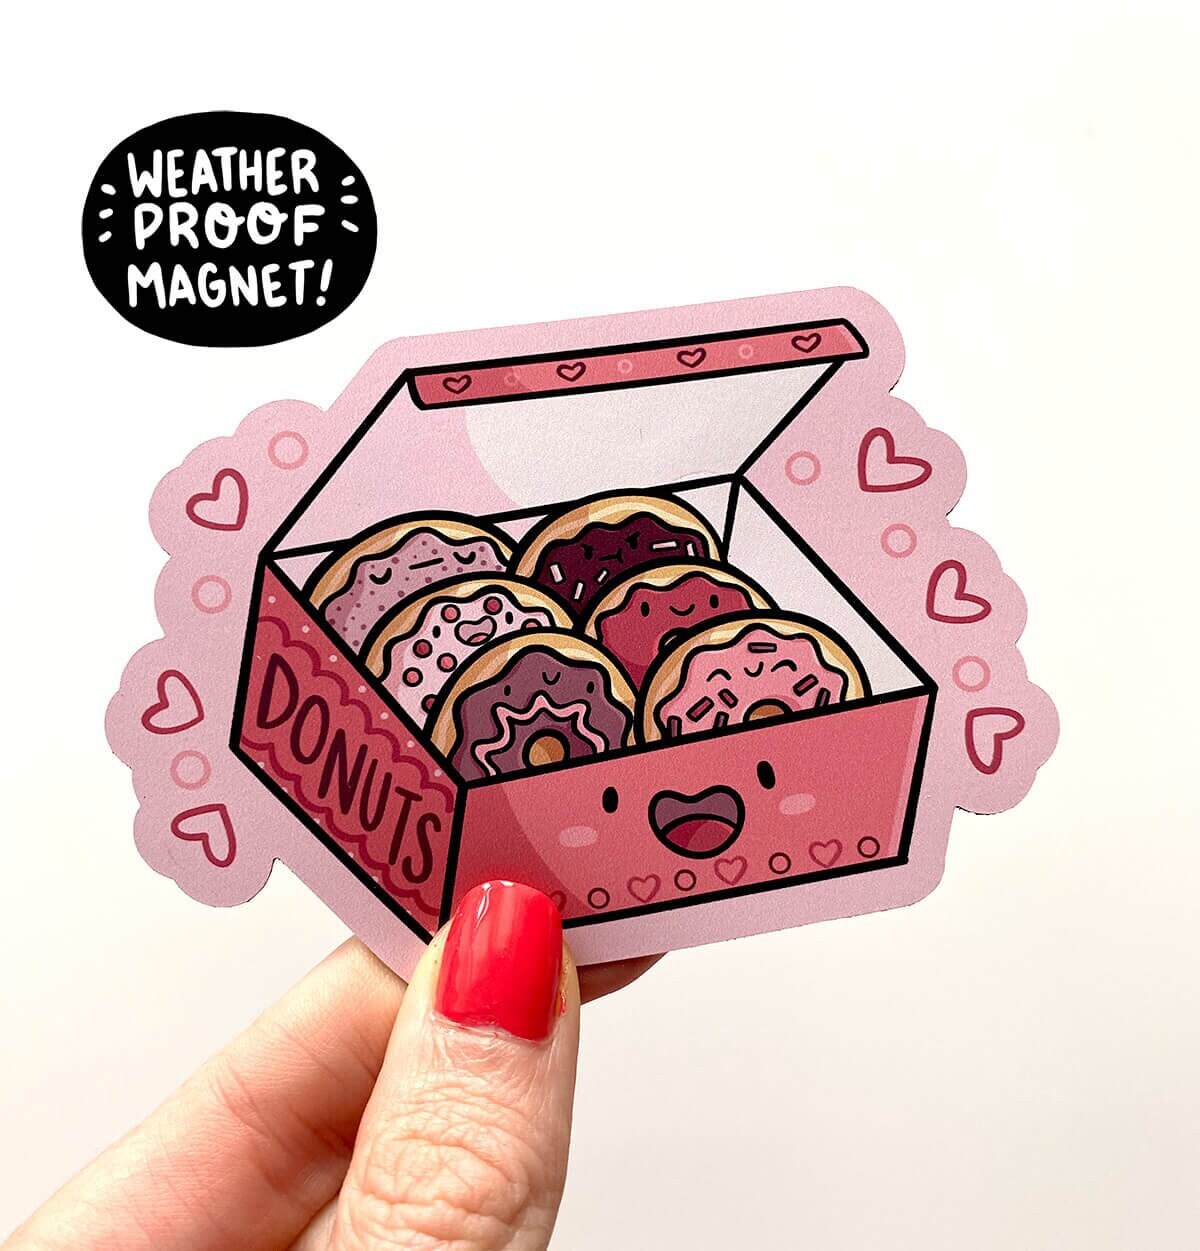 Box of Donuts Magnet